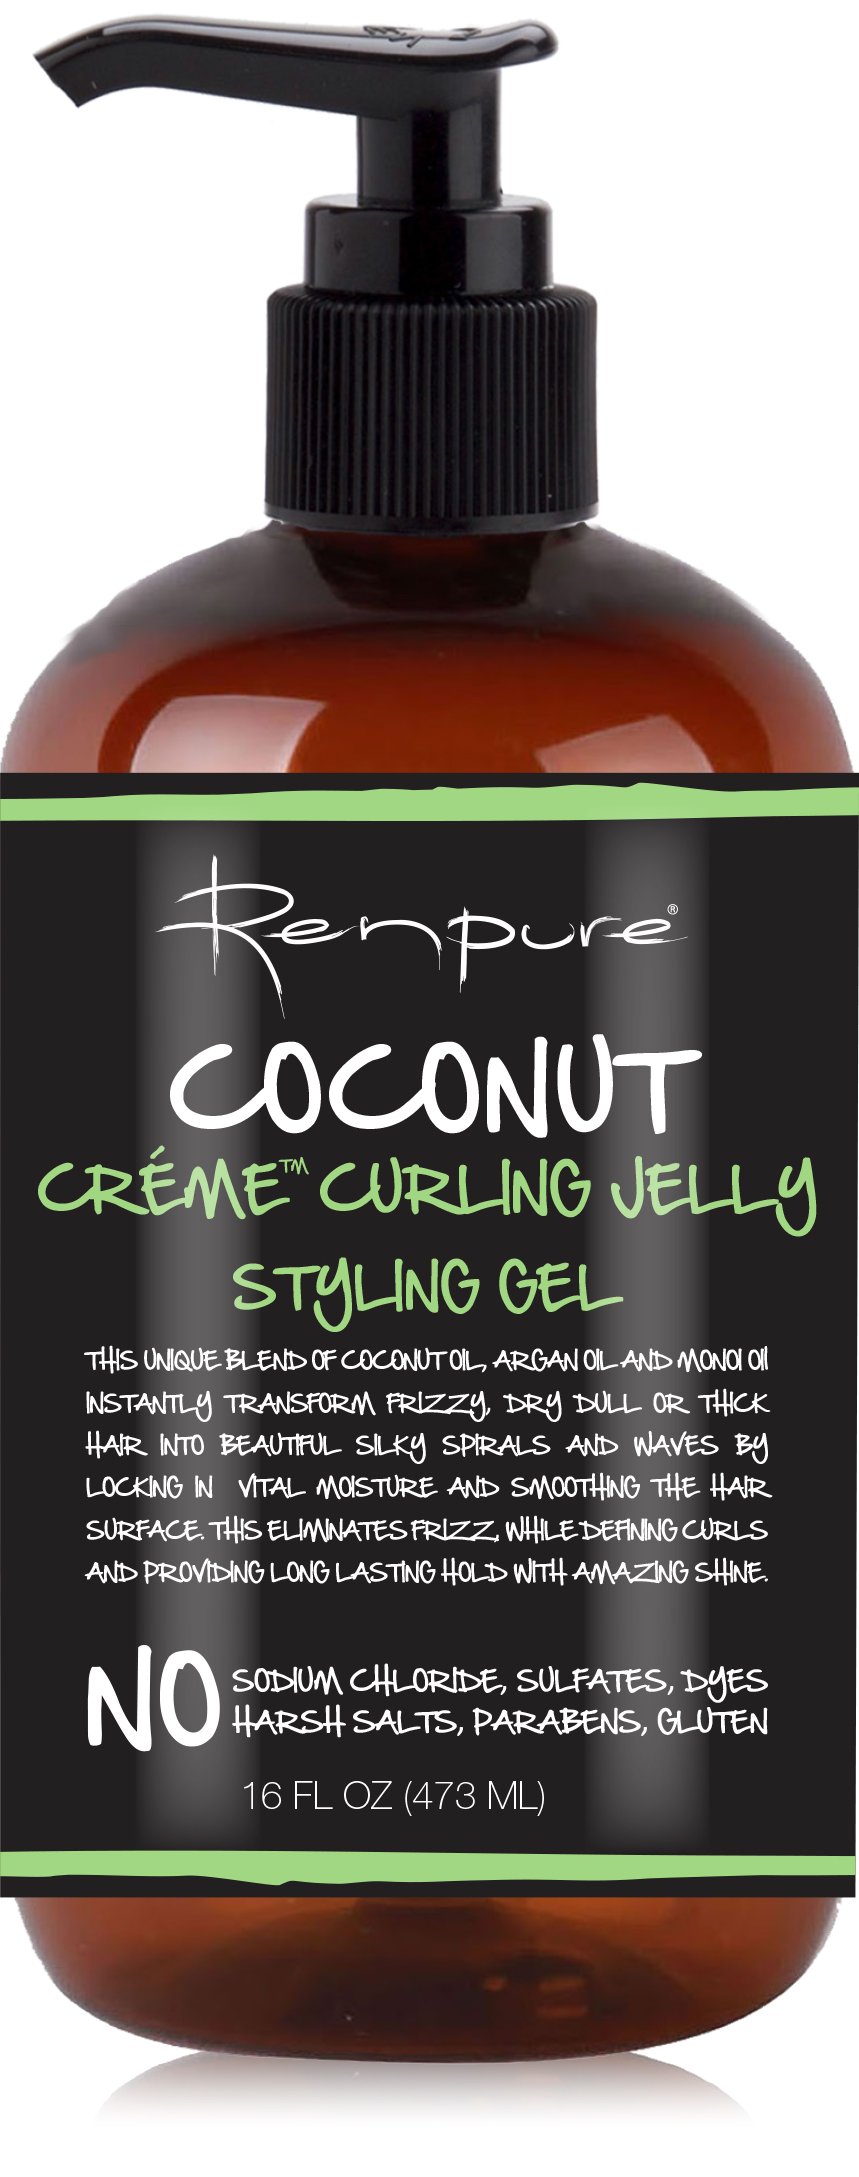 Renpure Coconut Creme Curling Jelly Styling Gel - Shop Hair Care at H-E-B